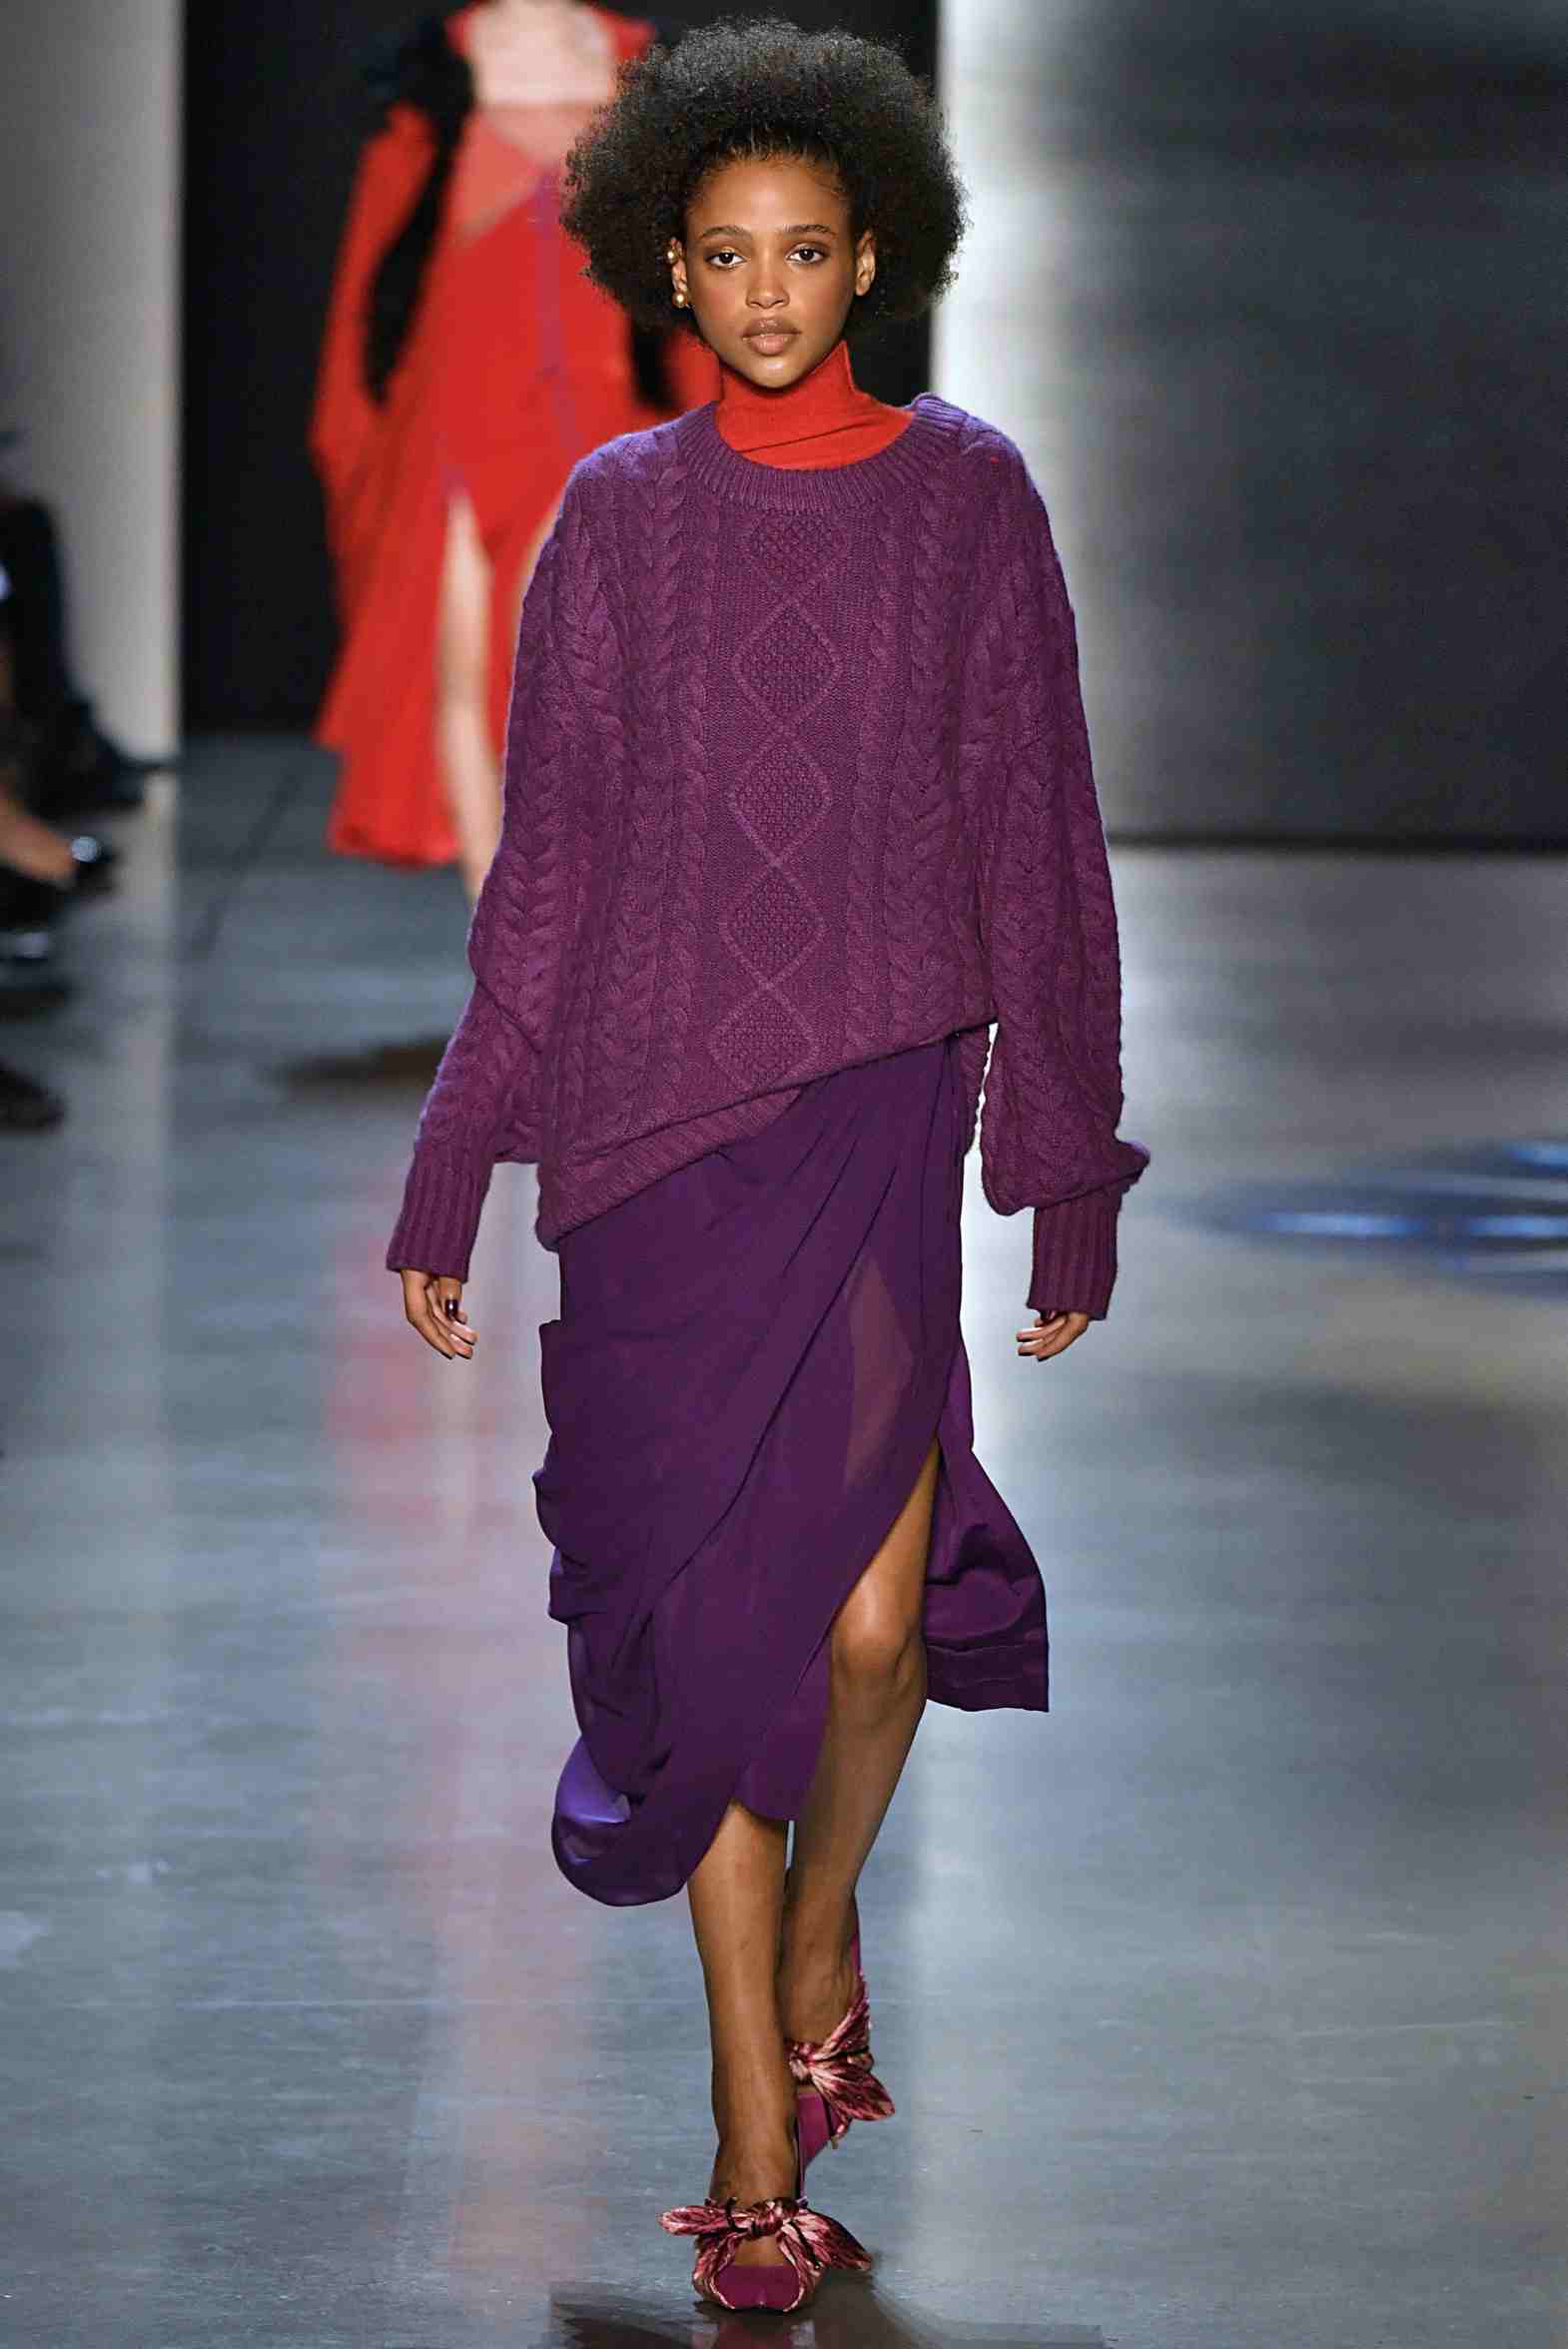 Violet combine Oversized knit sweater with mid-skirt